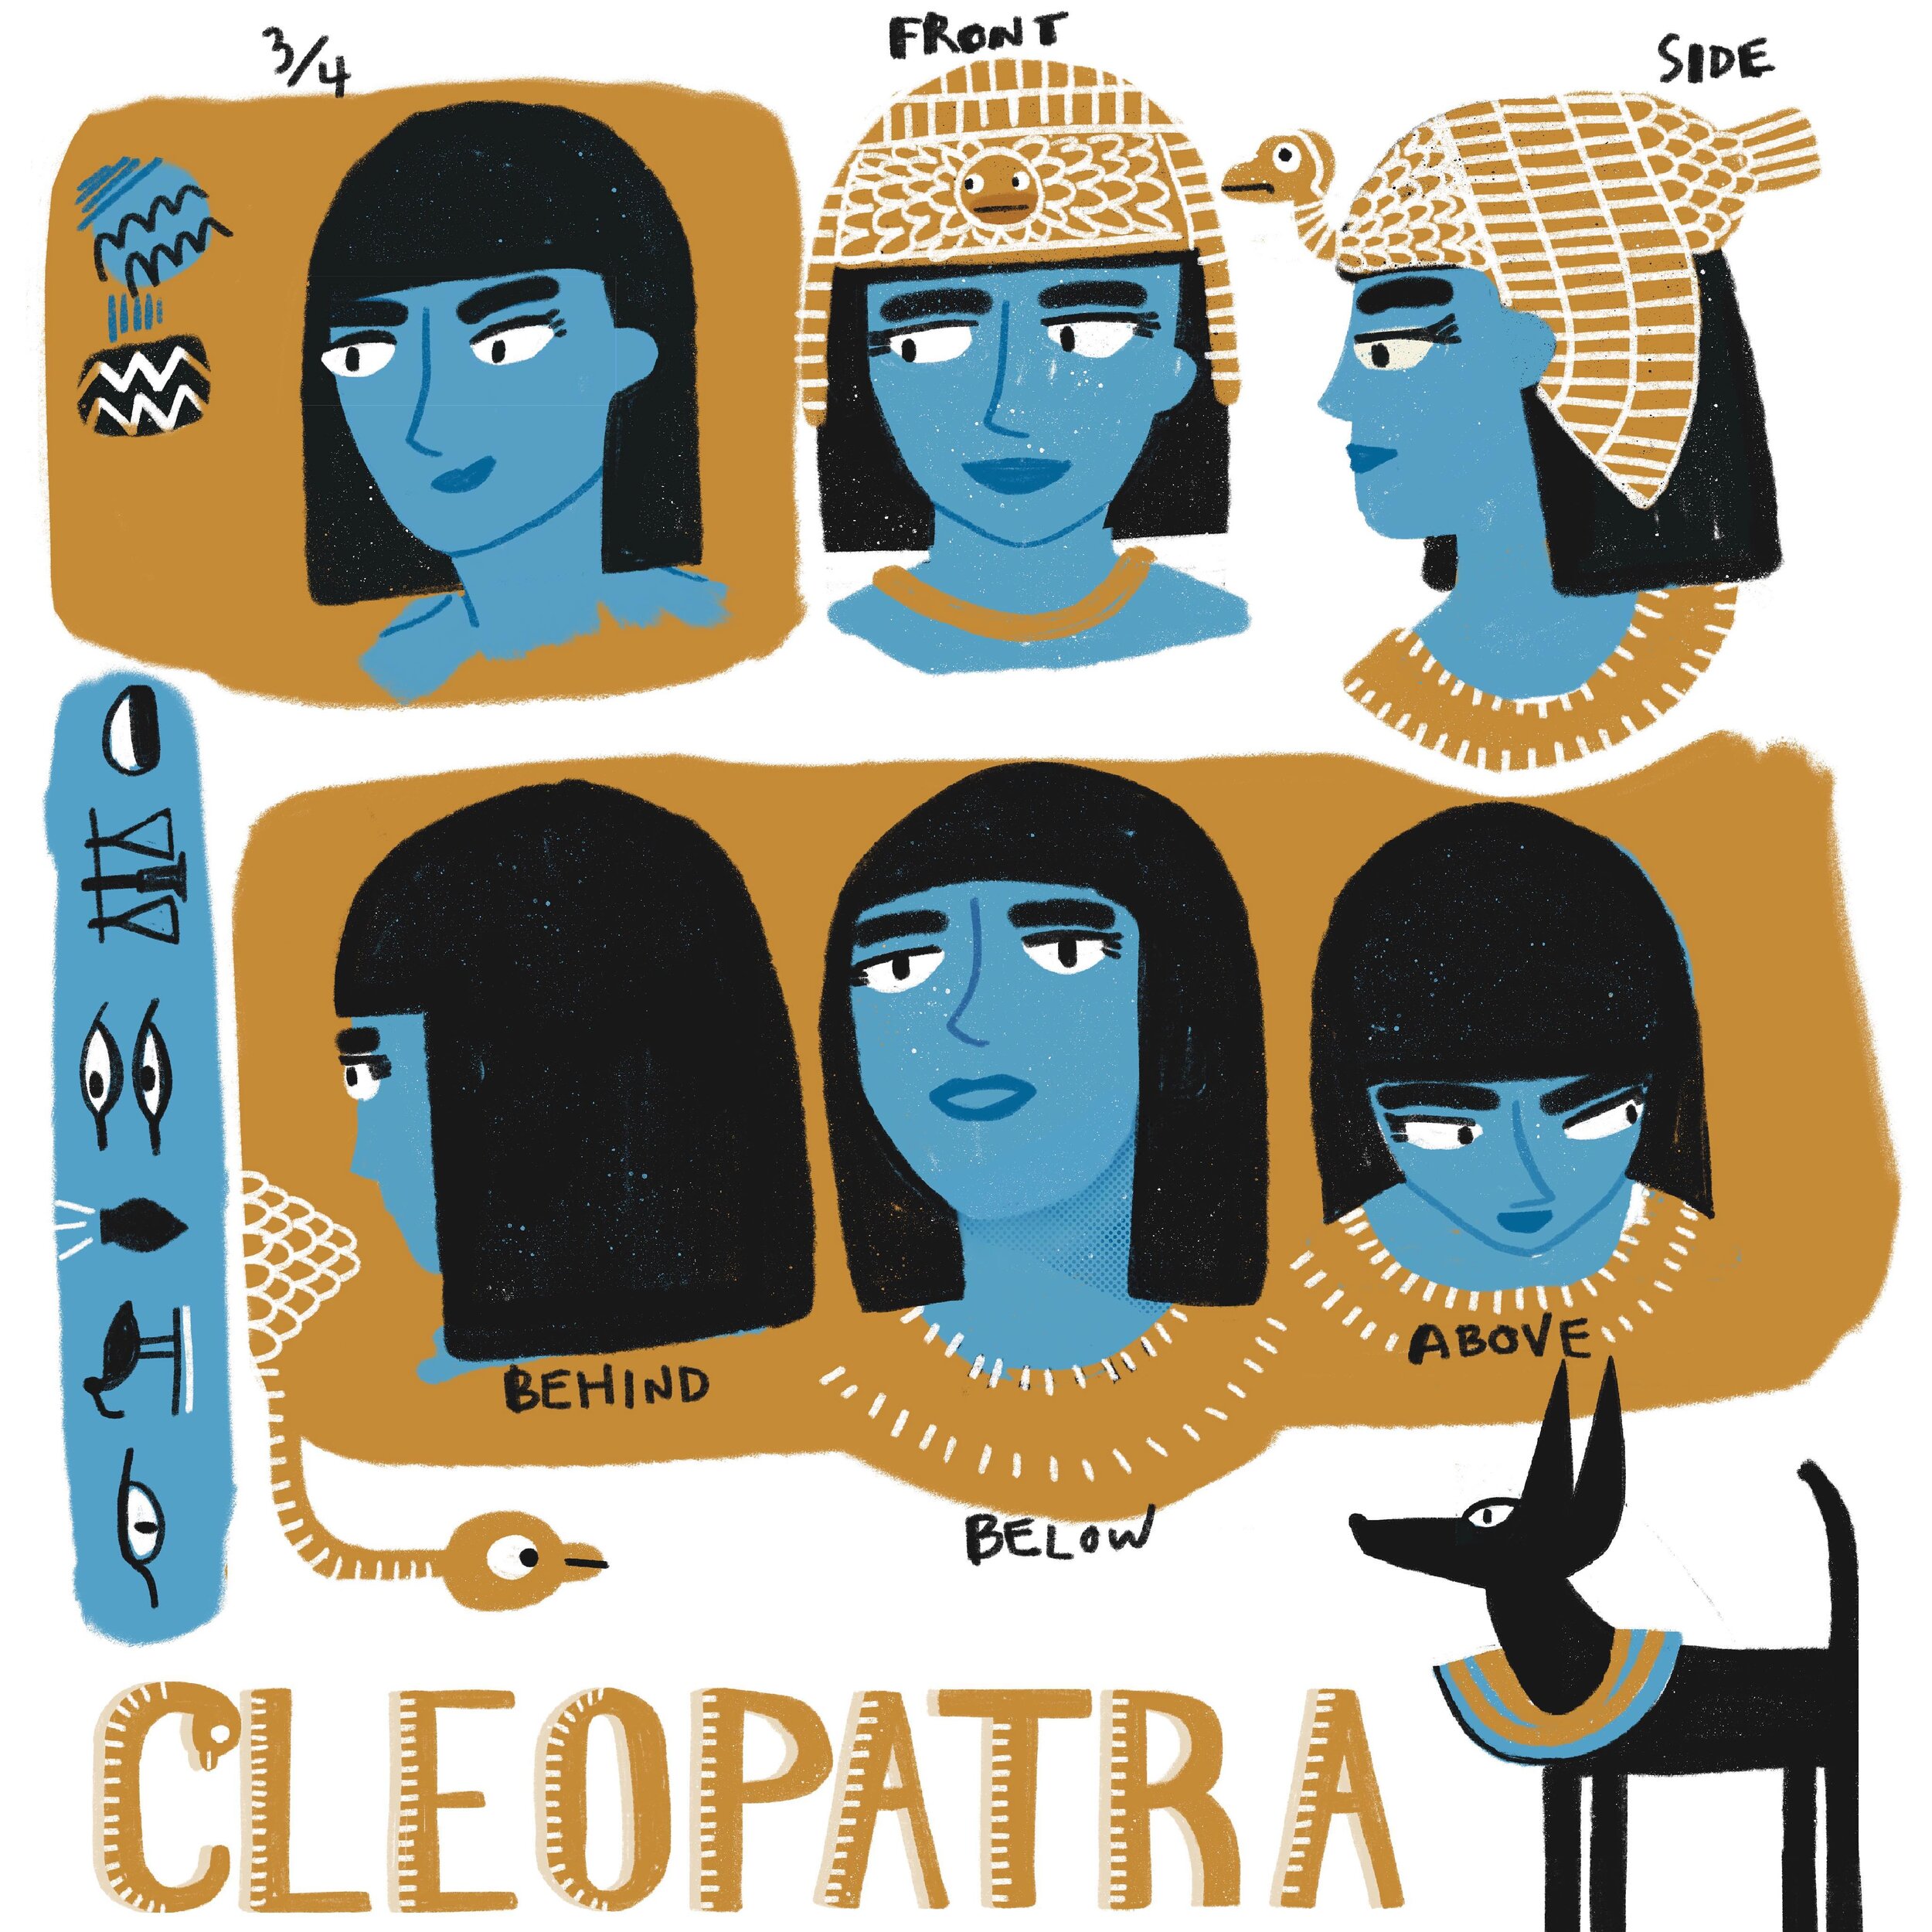 Cleopatra comin atcha! 

Daily doodle: Cleopatra character. I quite like the vulture from her headpiece and her dog. 

#characterdesign #sketches #cleopatra #cominatcha